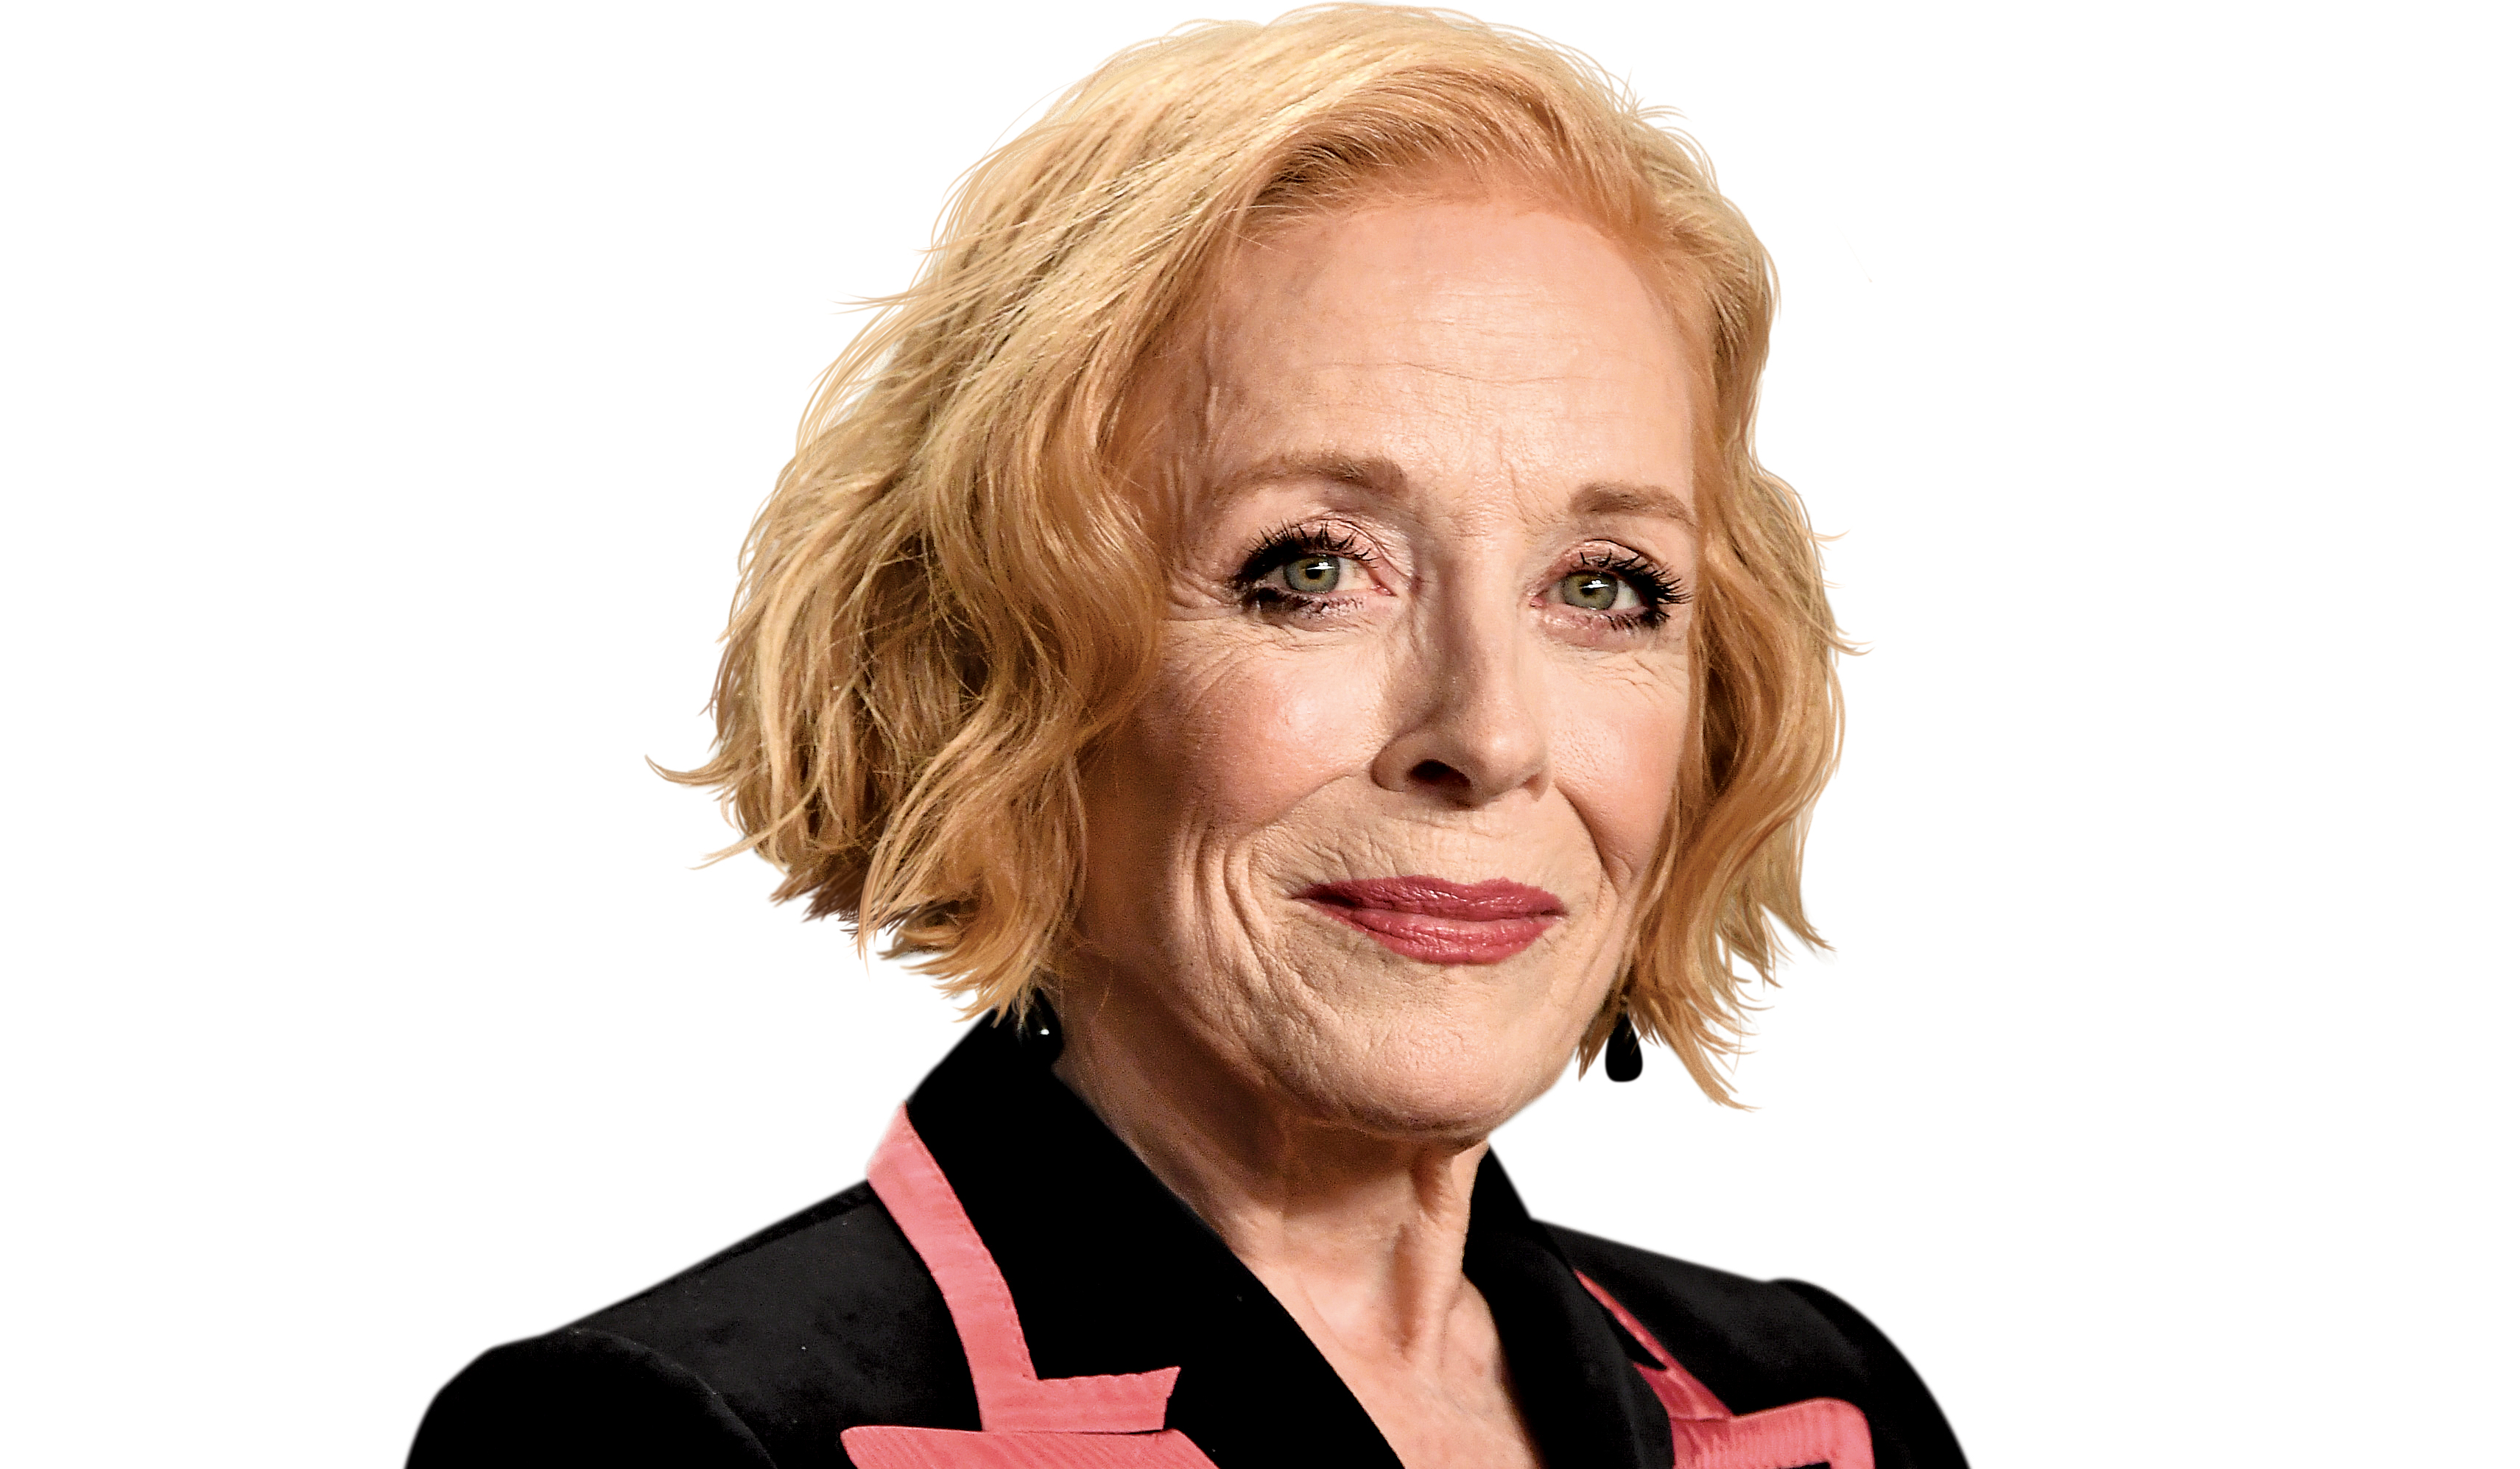 Holland Taylor is Having Quite a Year with Netflix's 'The Chair' and Apple  TV+'s 'The Morning Show